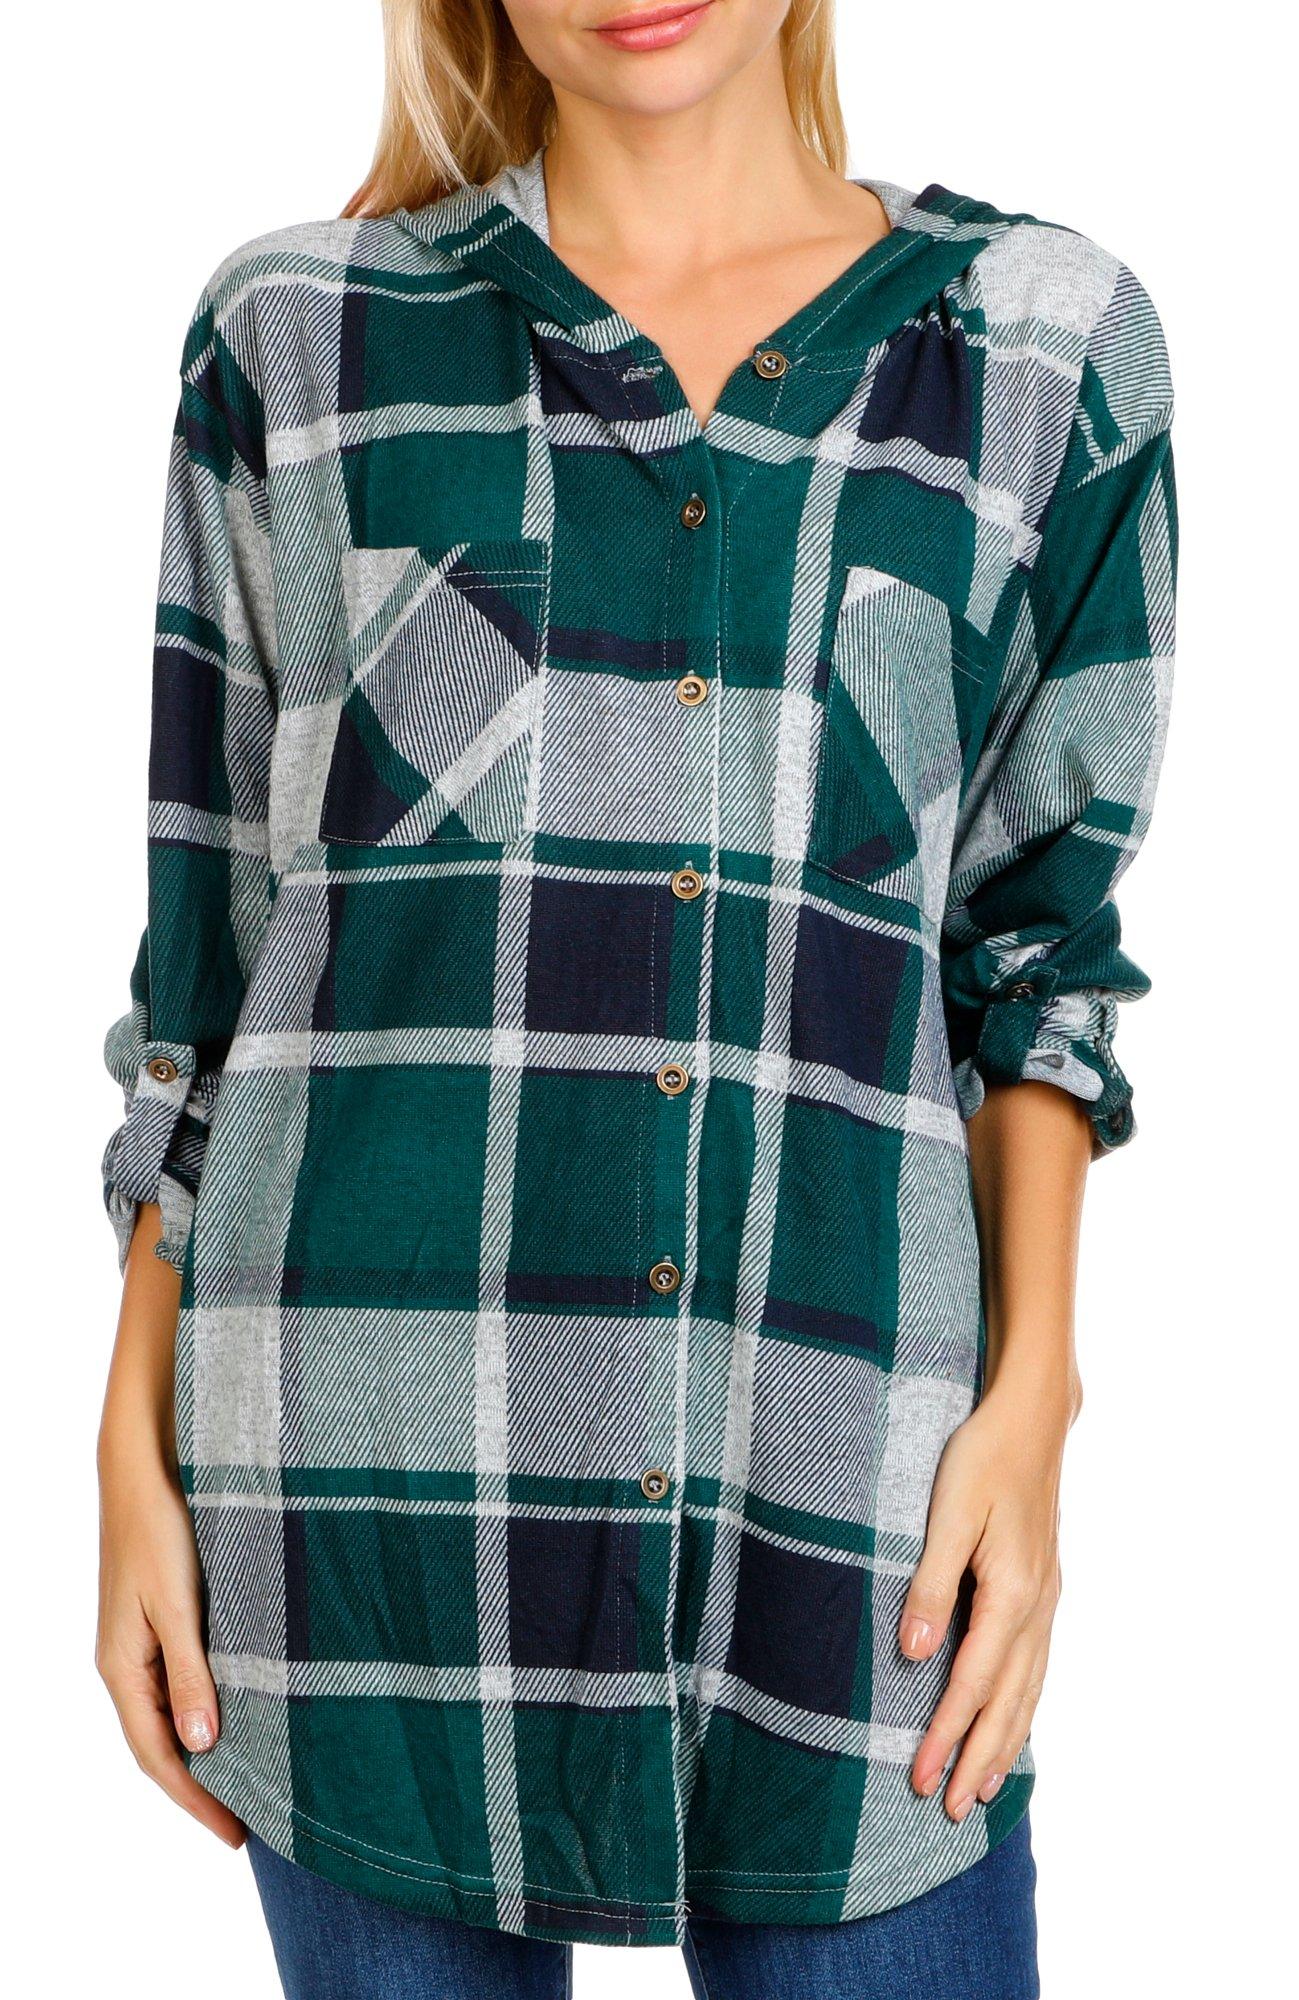 Juniors Hooded Plaid Button Down Top